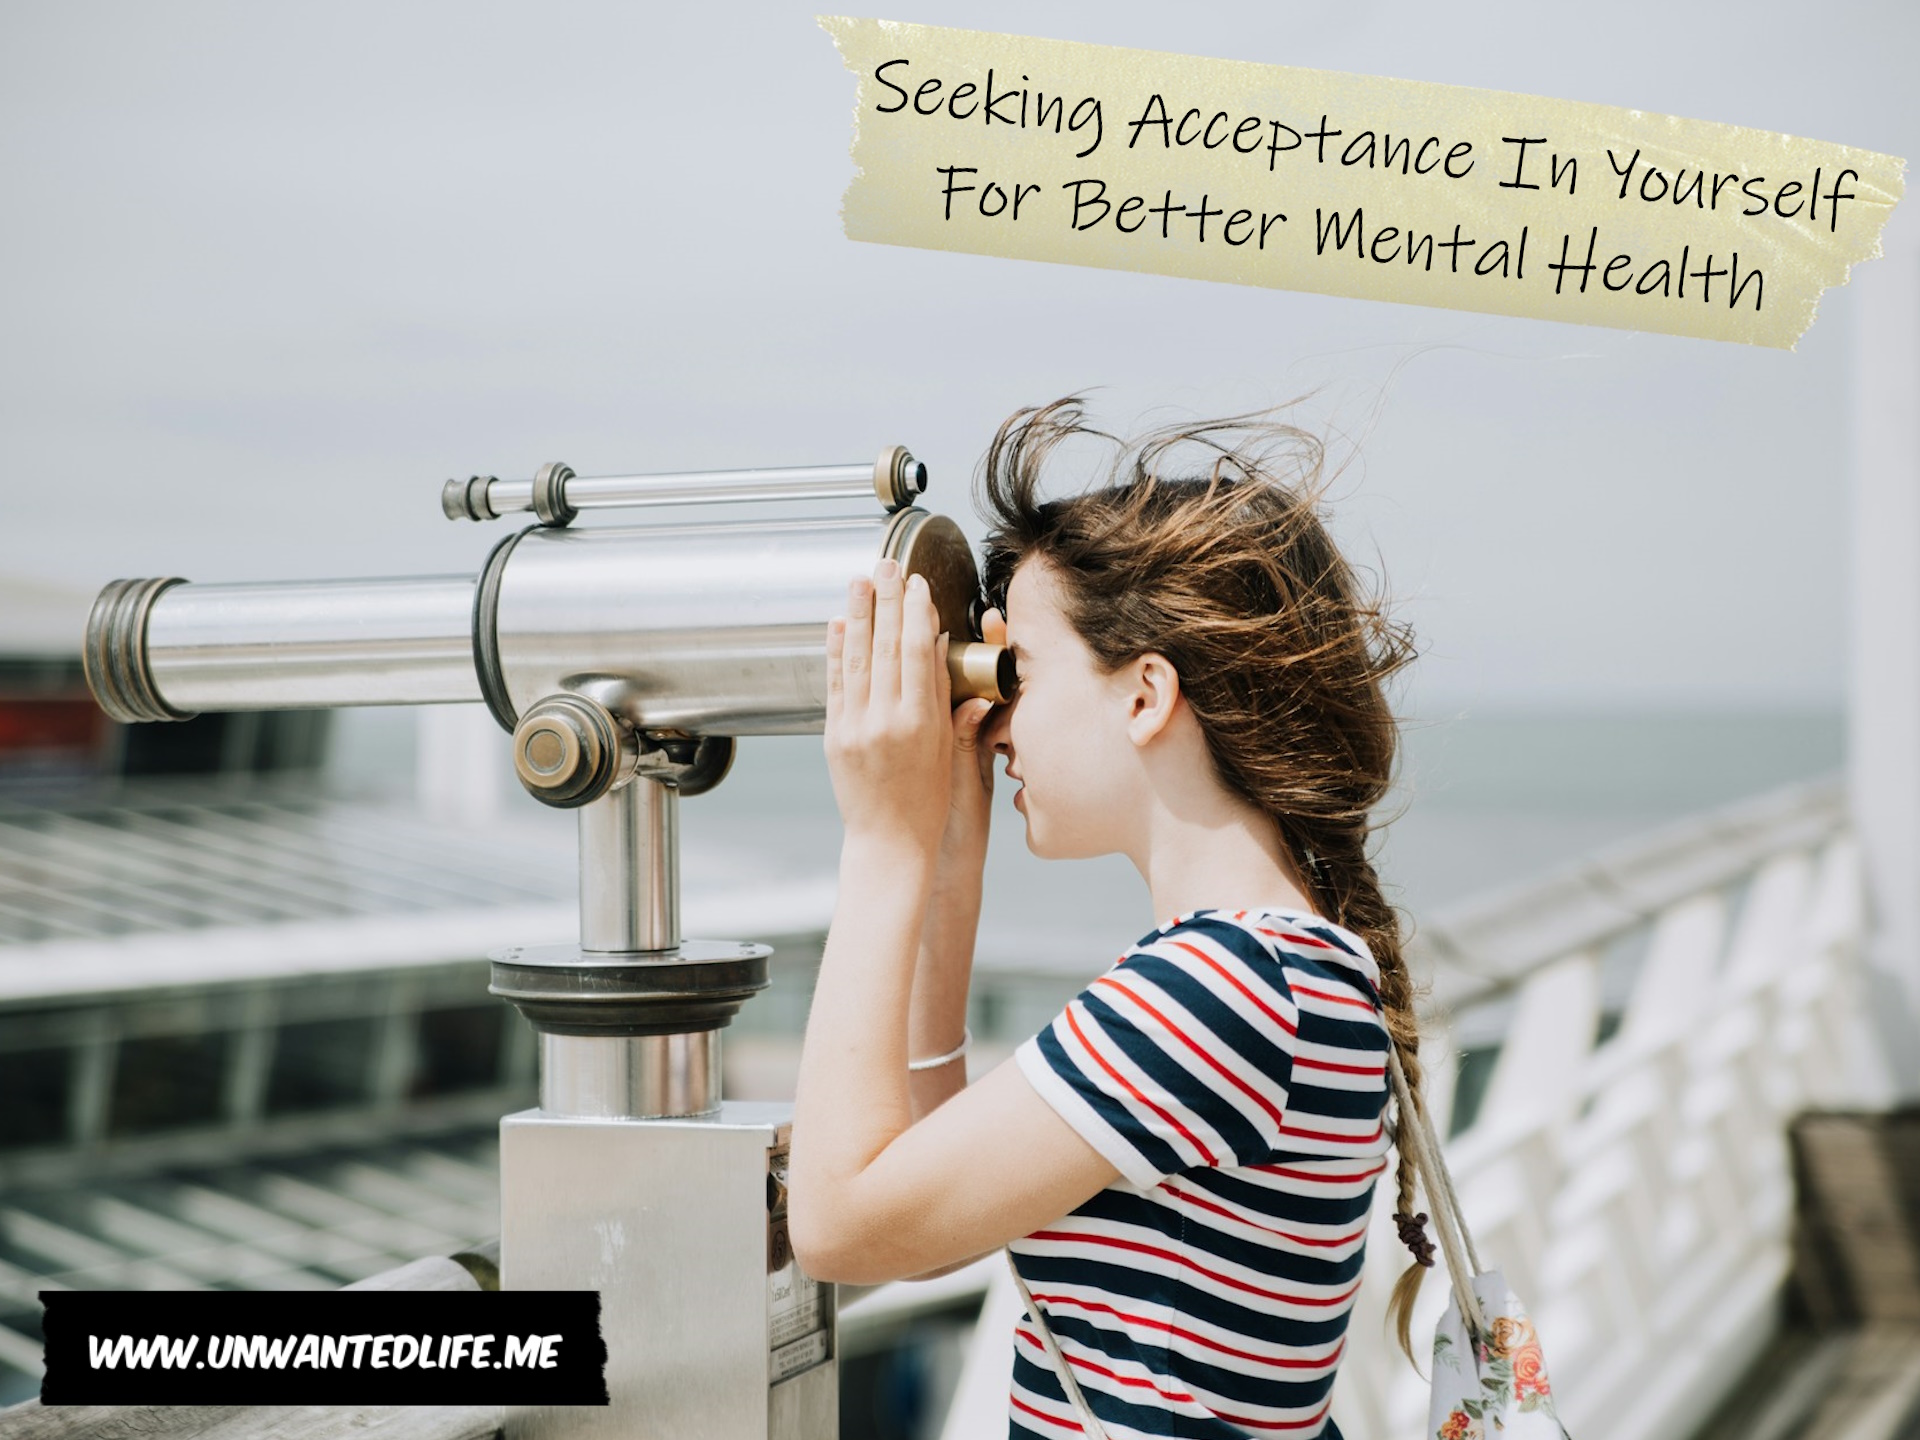 A photo of a White woman looking through a set of tourist binoculars to represent the topic of the article - Seeking Acceptance In Yourself For Better Mental Health